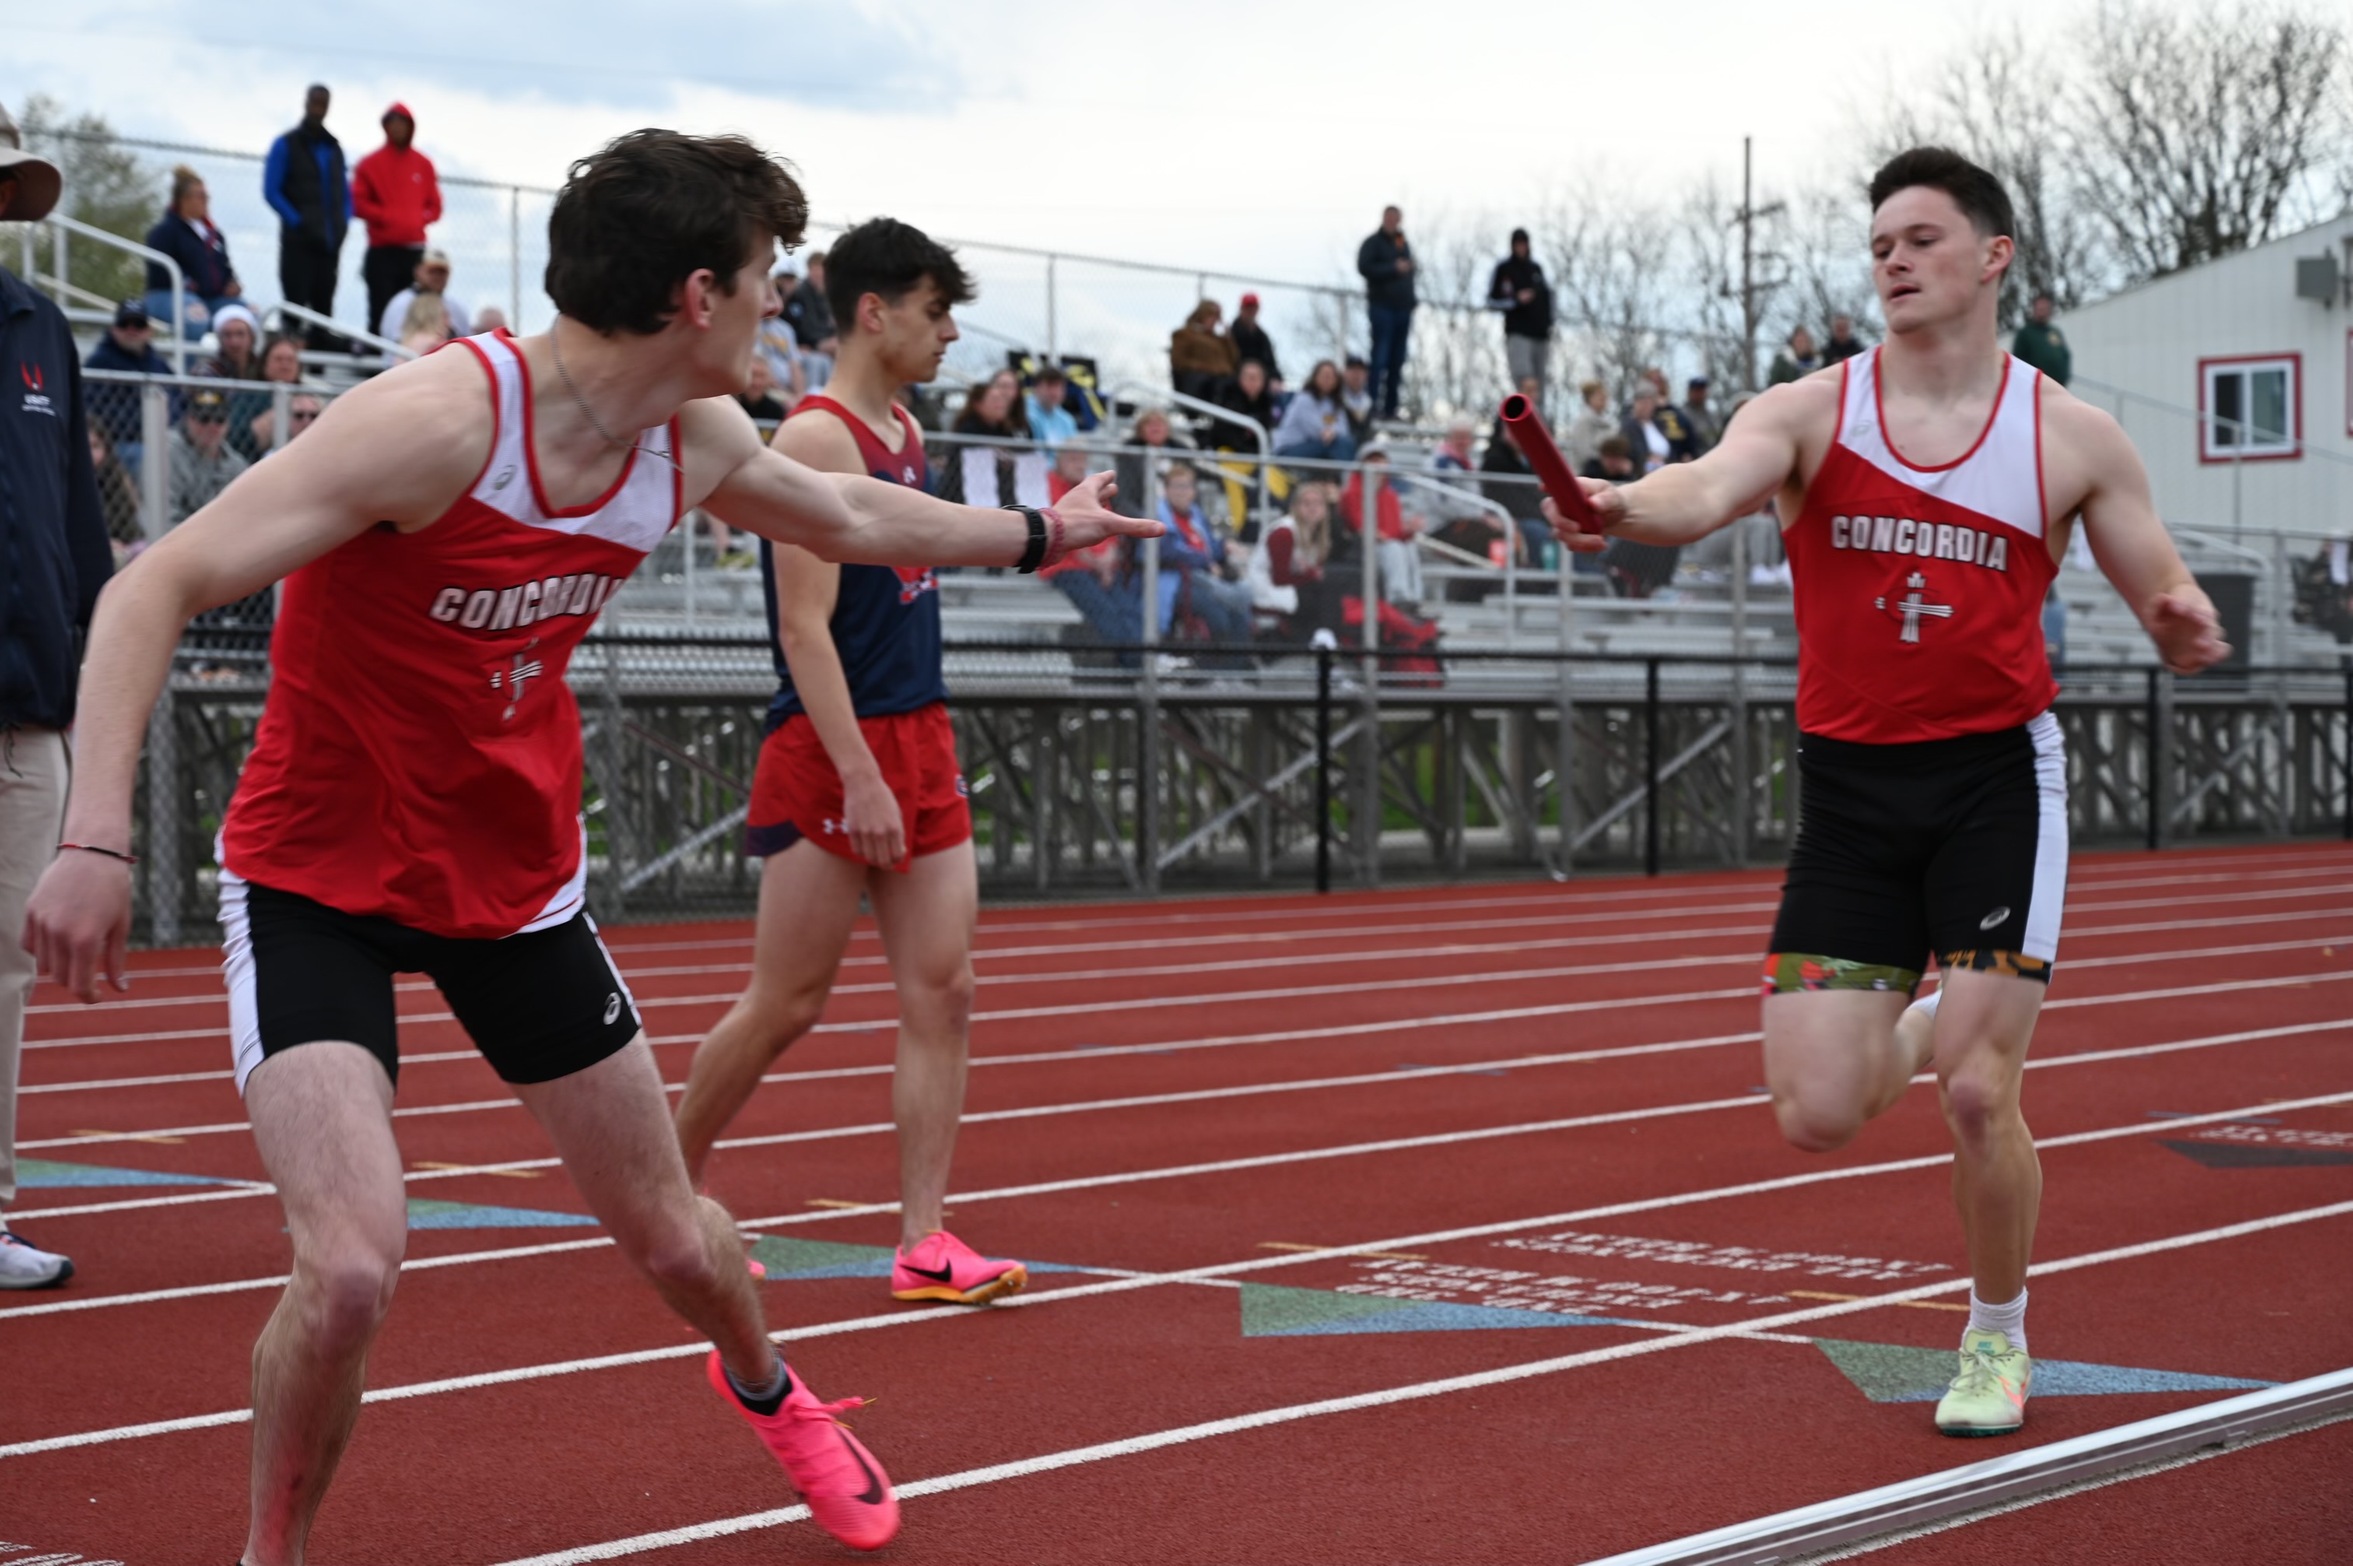 Men's Track and Field Relay Team's lead the way at the CUAA Legacy Meet